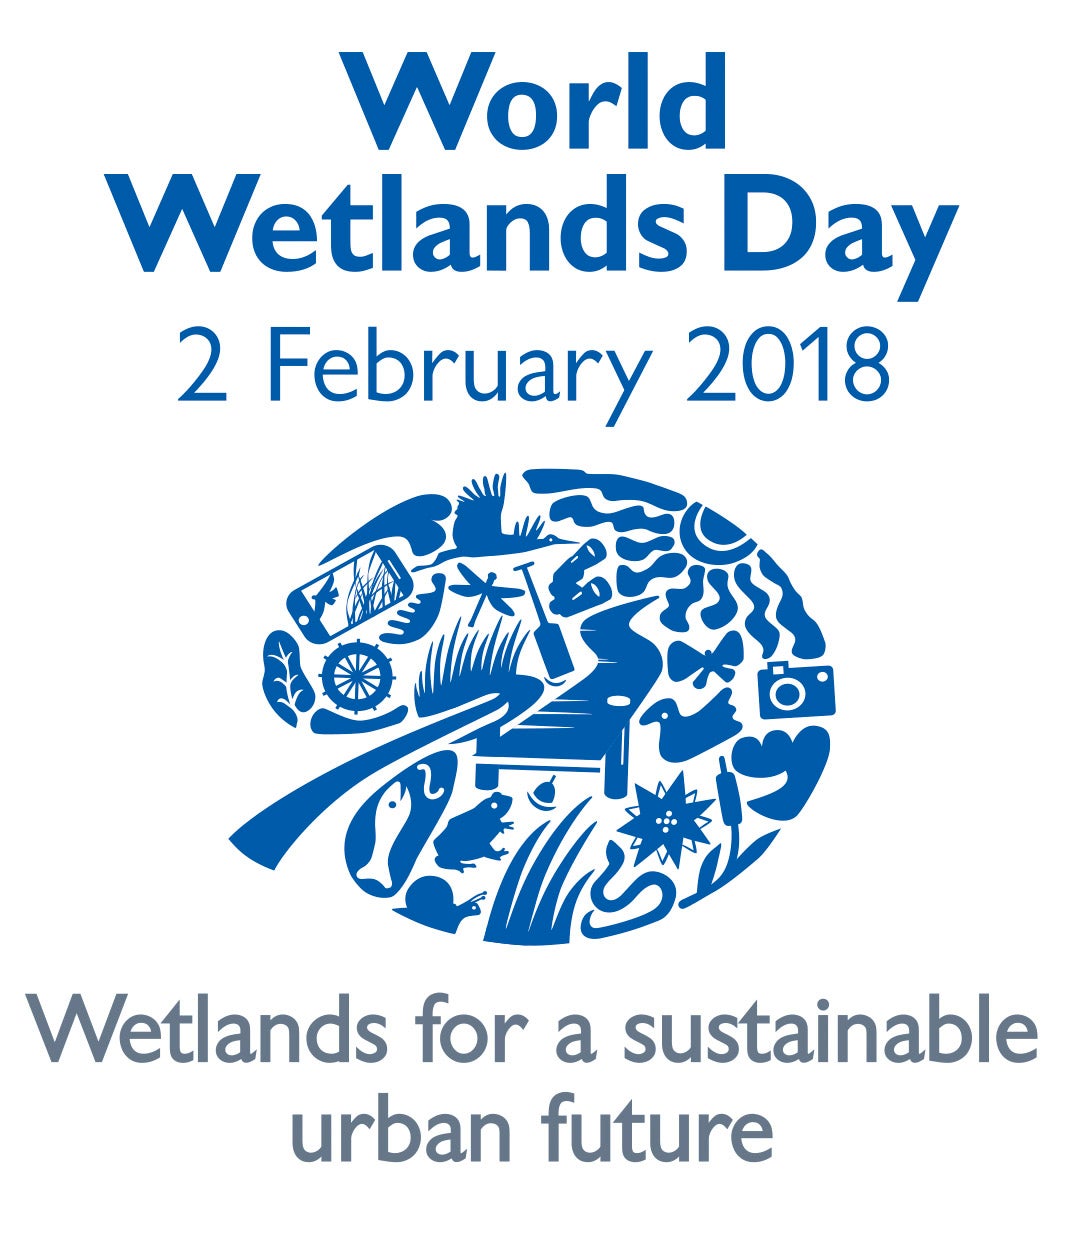 World Wetlands Day 2018 Poster